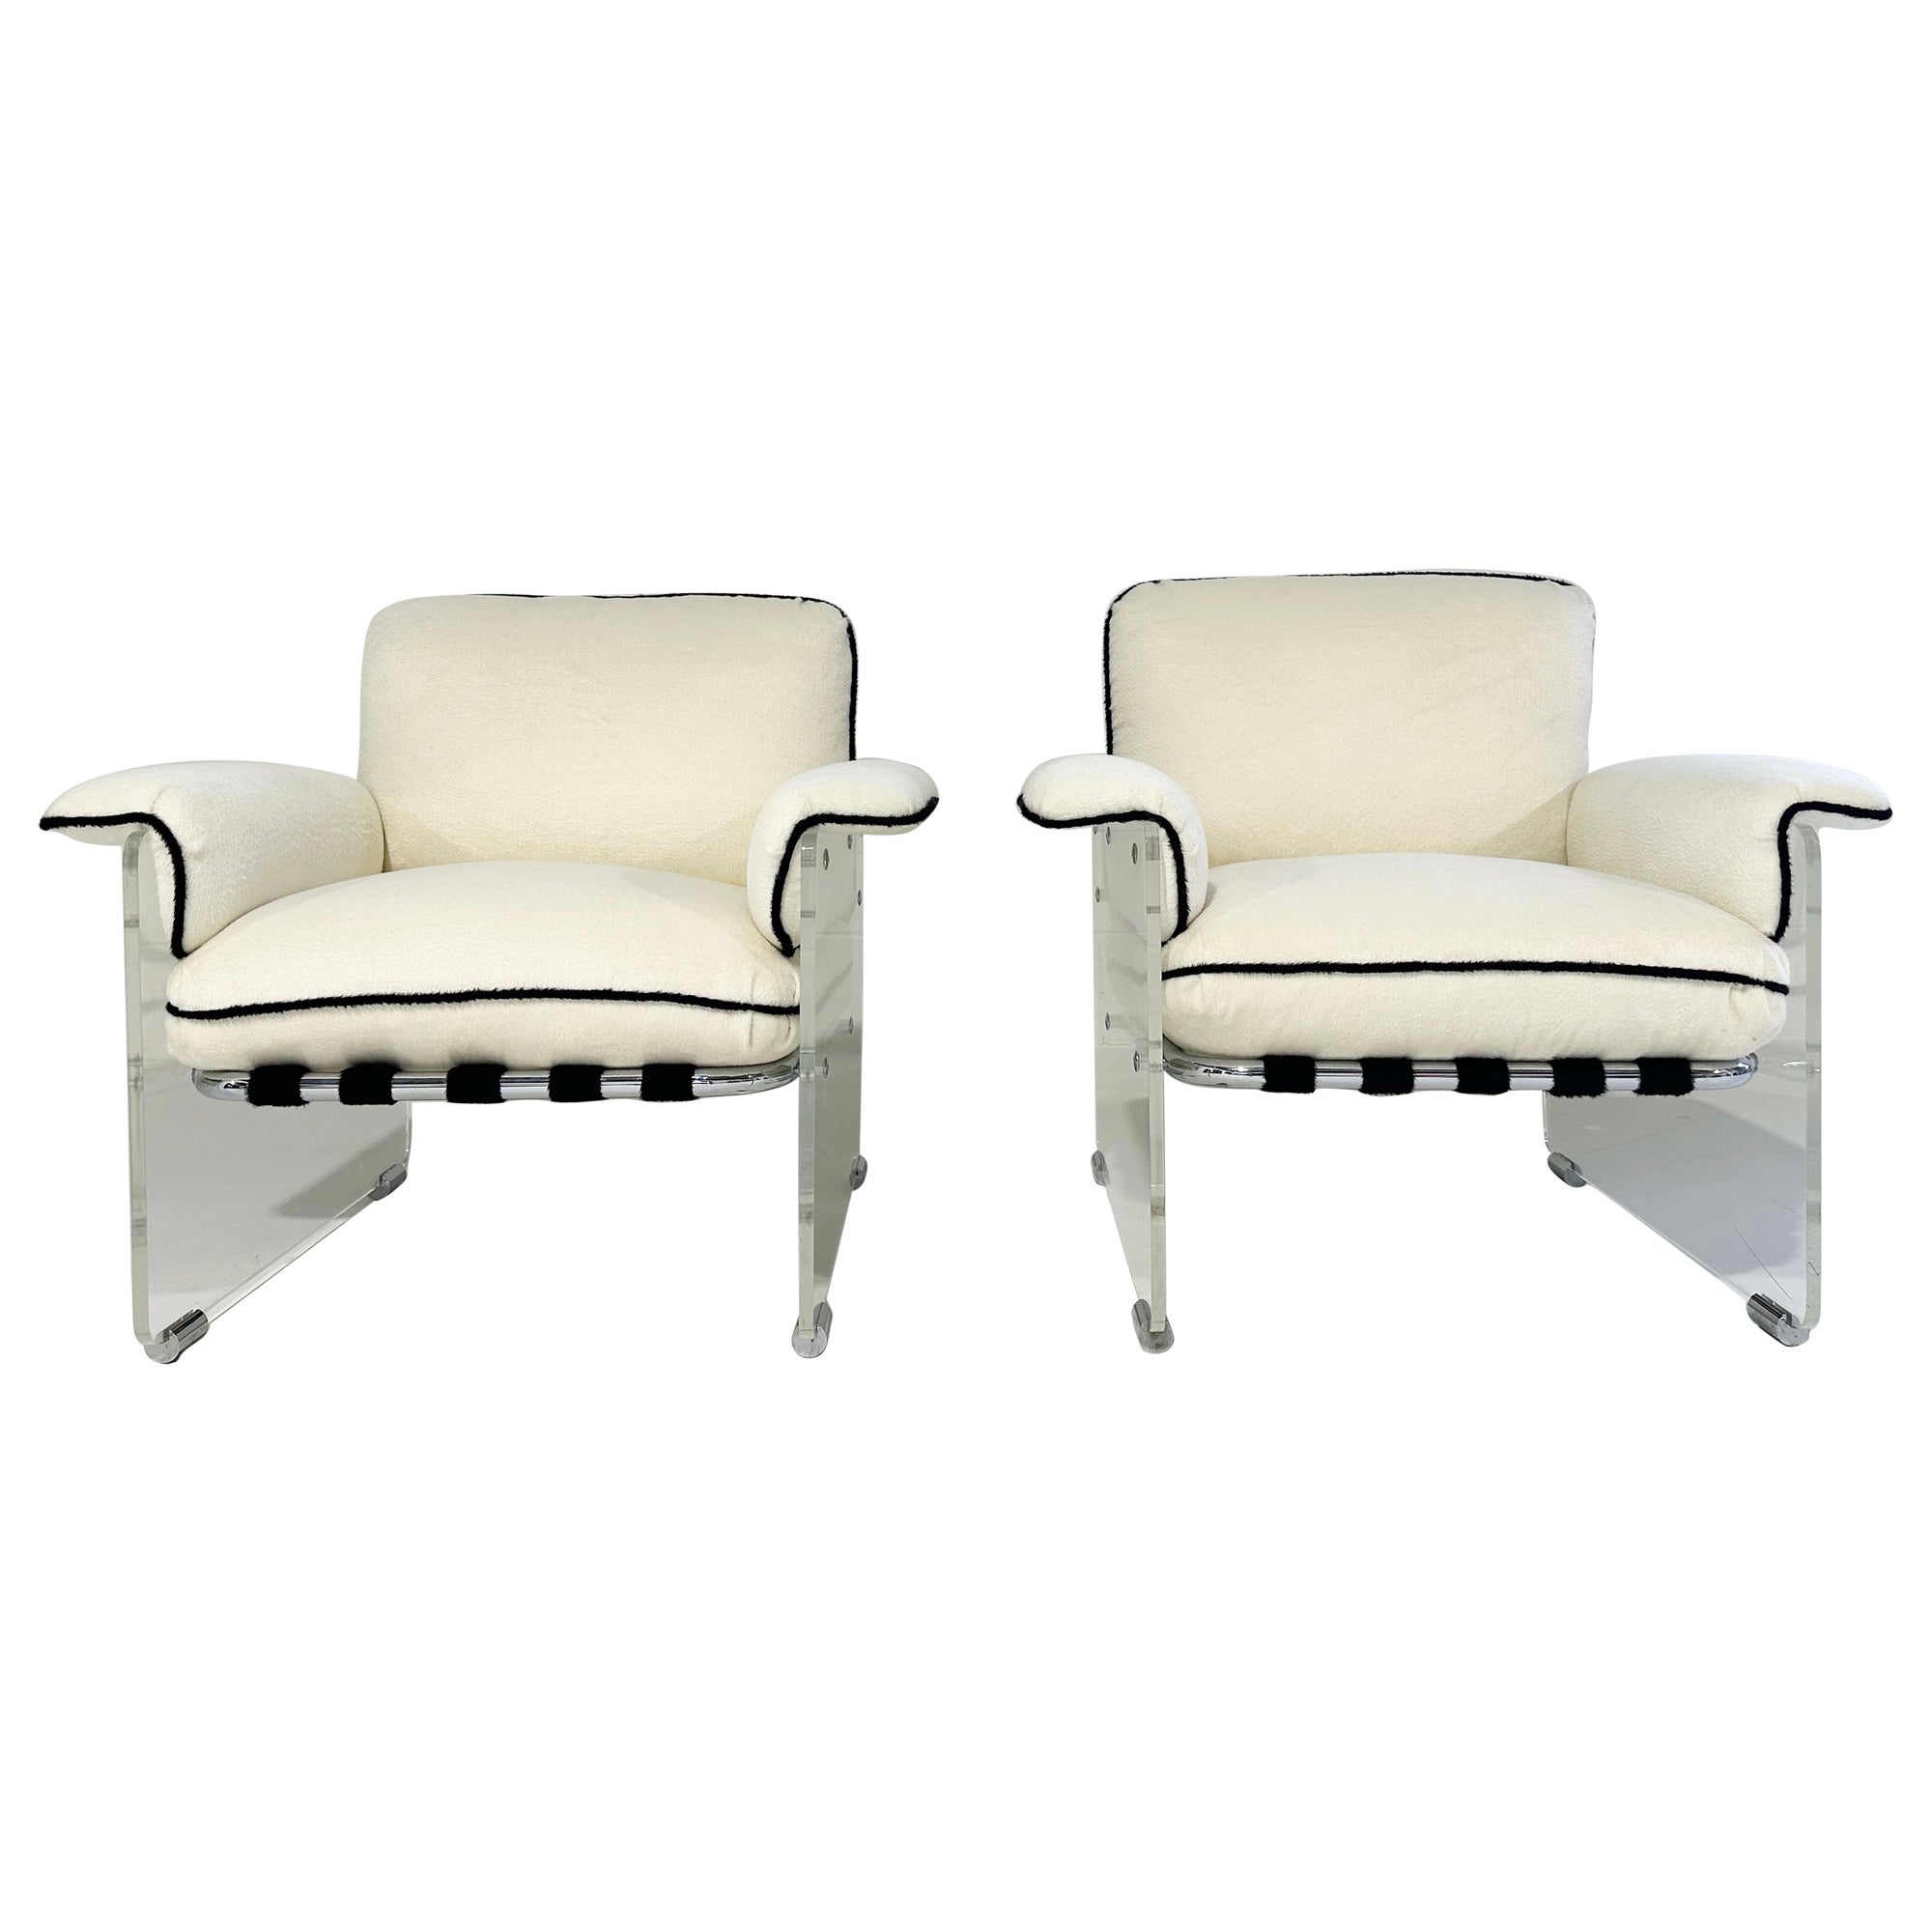 Pace Collection Argenta Lucite Chairs in Inata Alpaca Fabric, pair For Sale